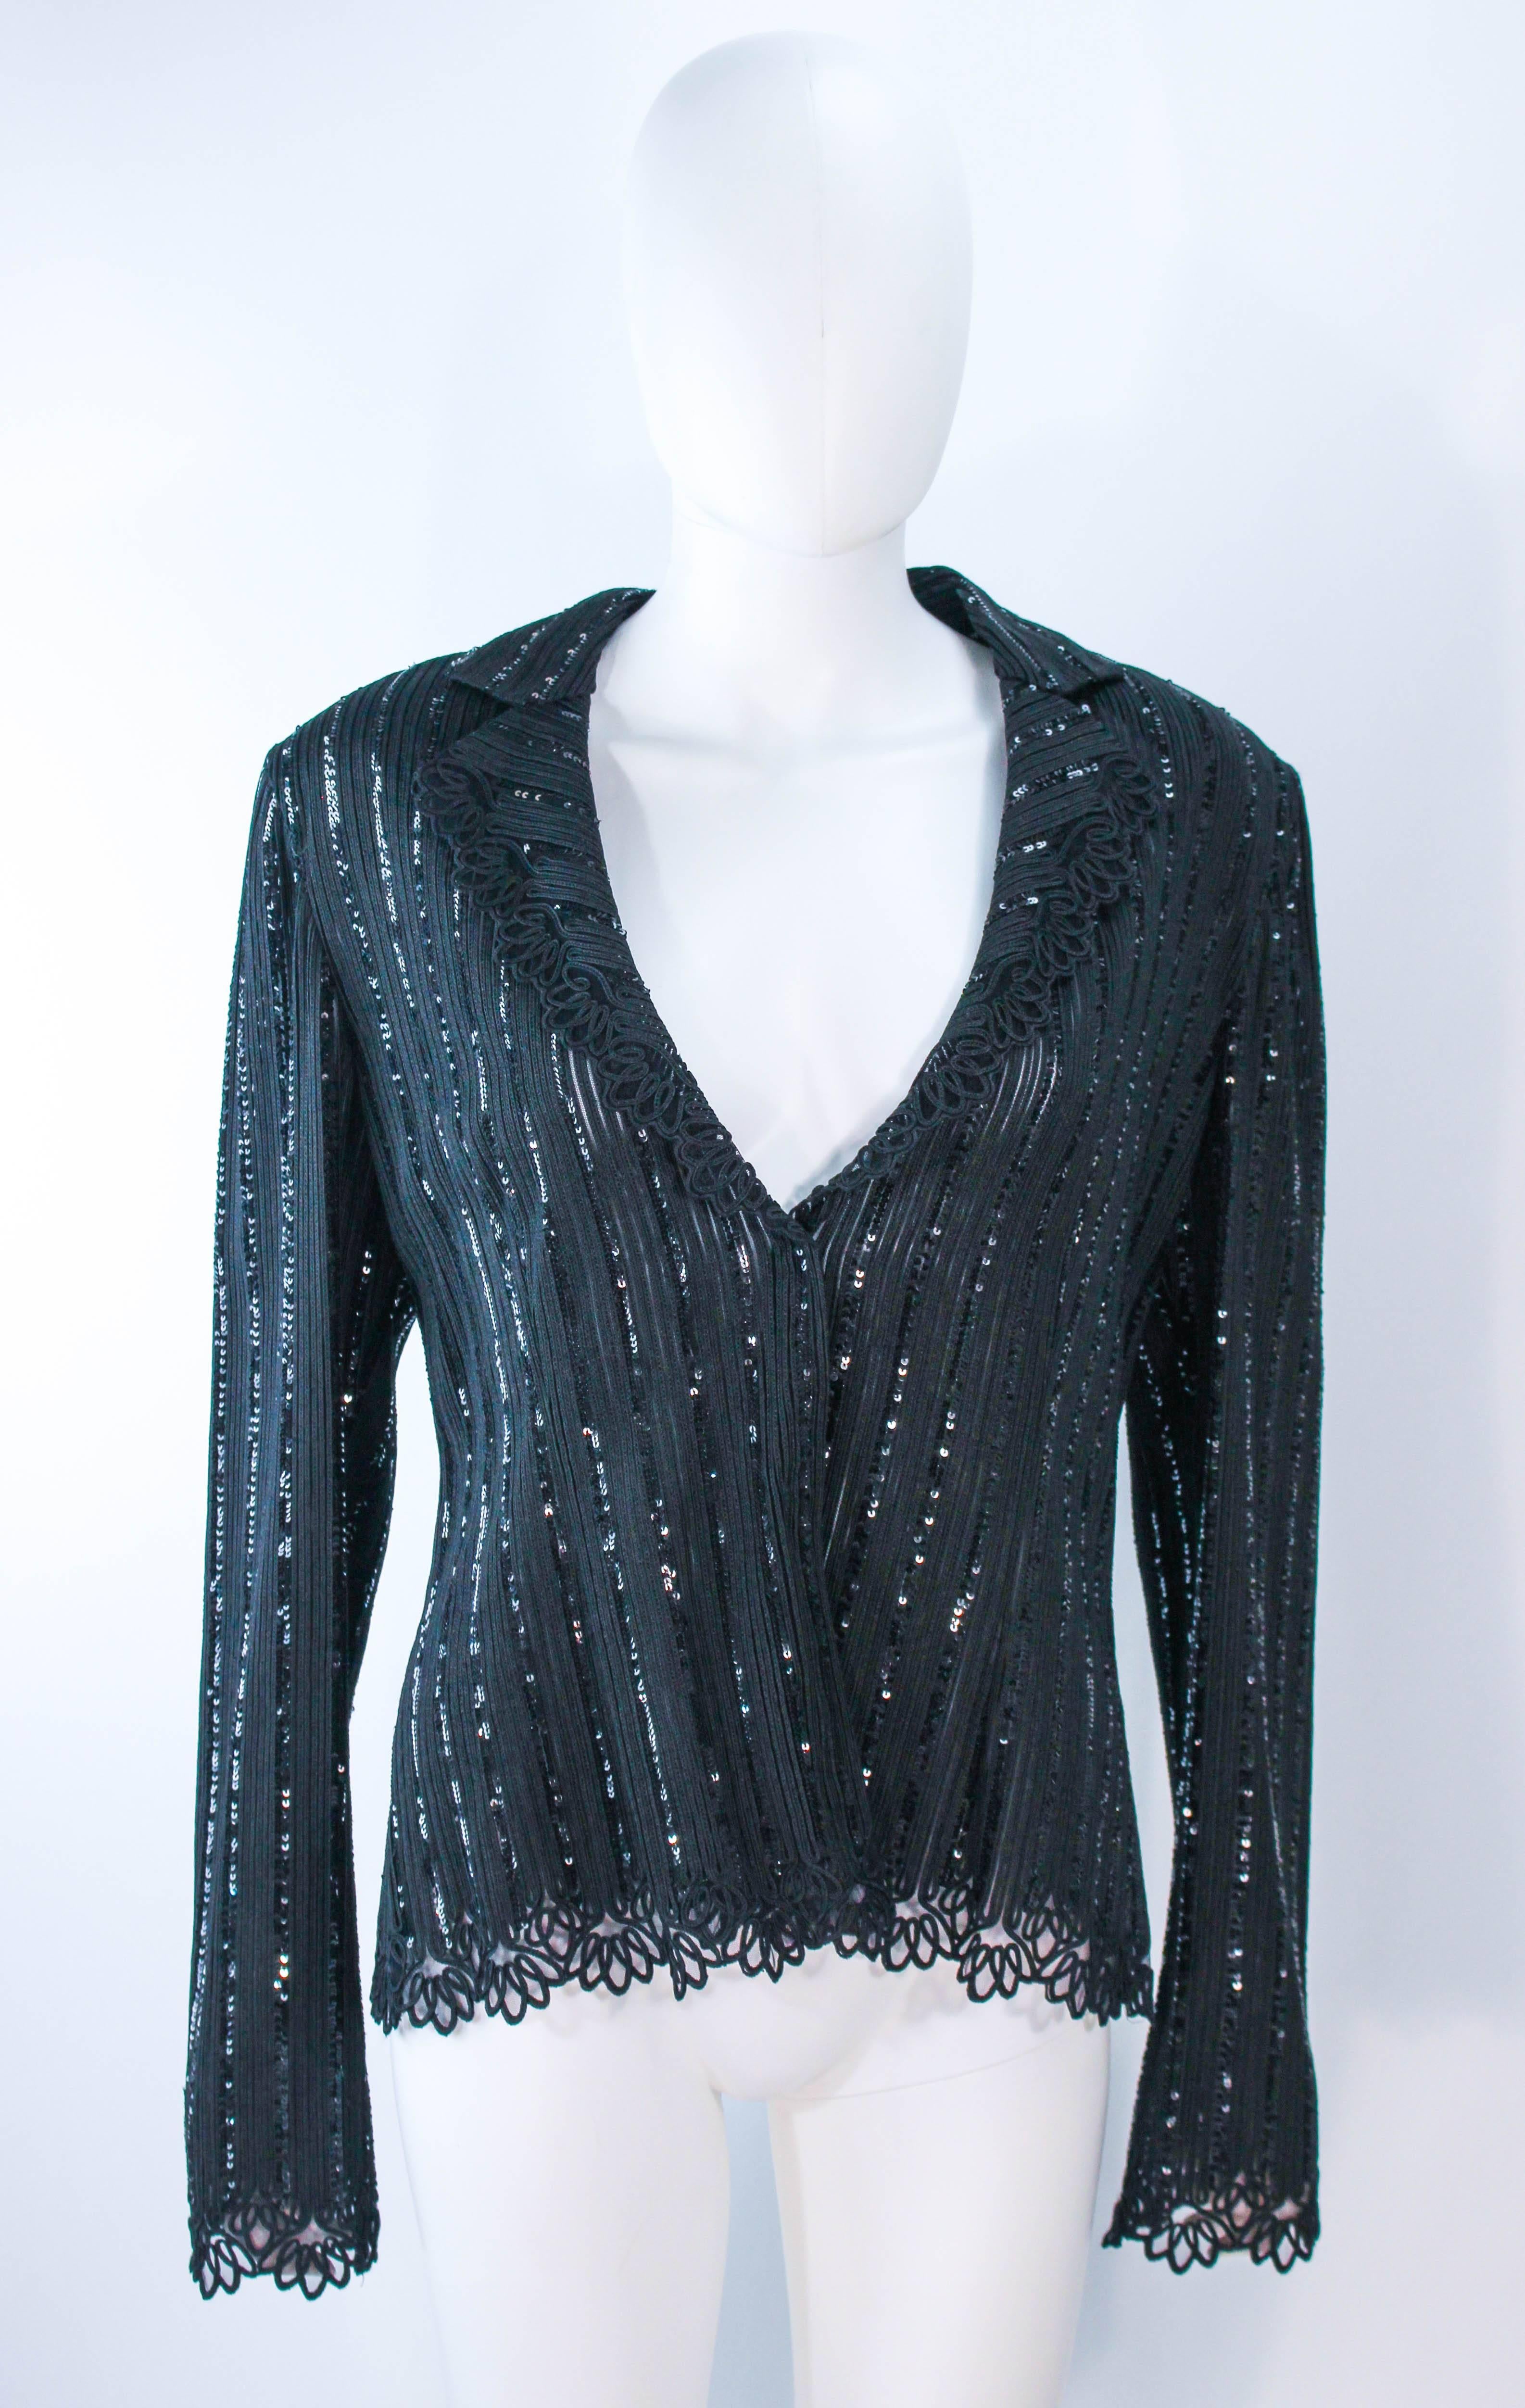 This Giorgio Armani sweater is composed of a black knit with lace trim and sequin applique. There are center front closures. In excellent condition. 

**Please cross-reference measurements for personal accuracy. Size in description box is an